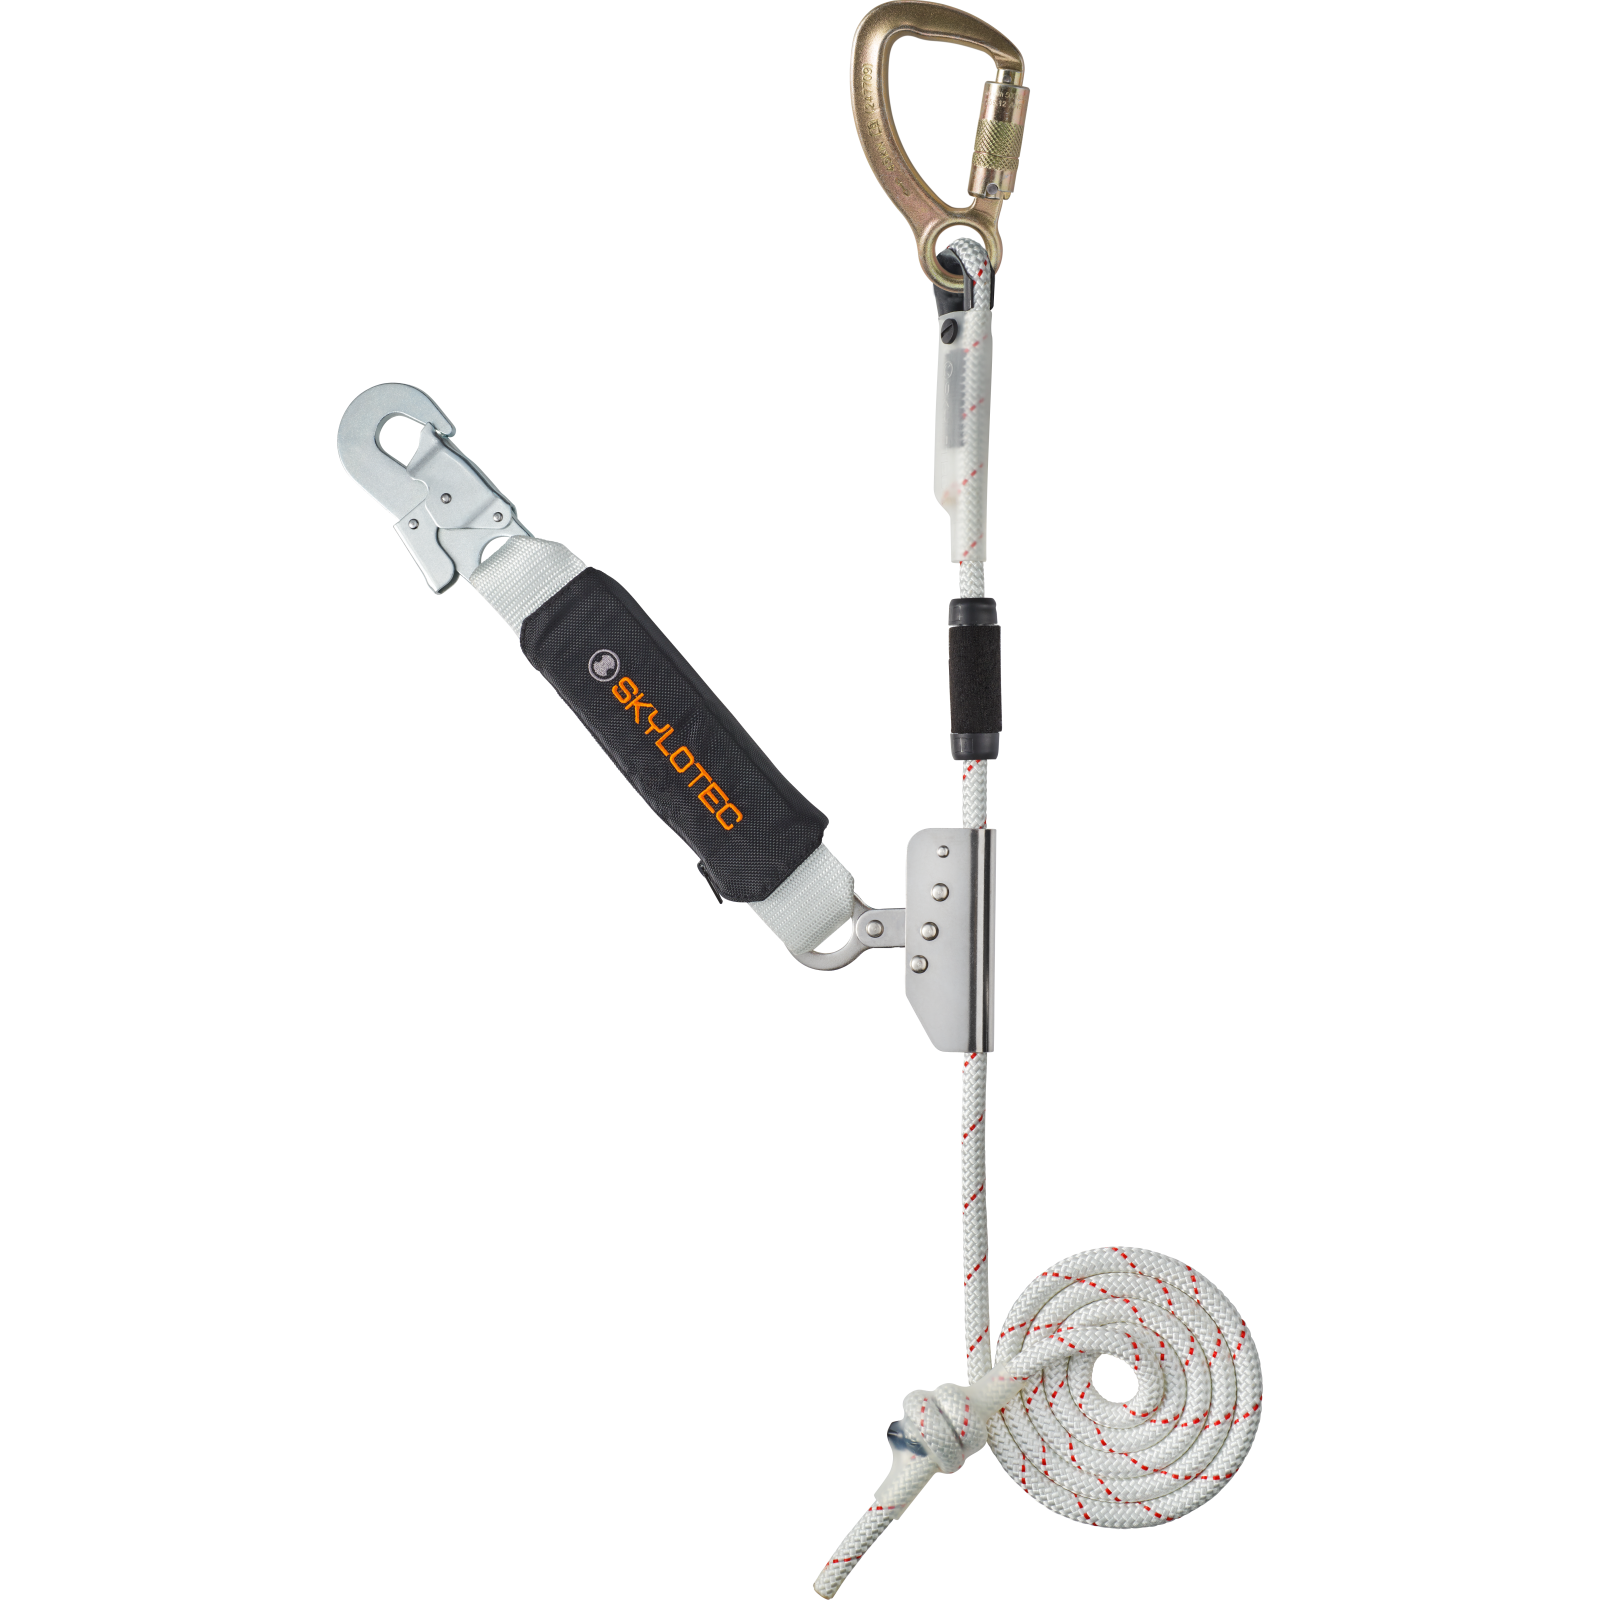 SKN BFD SK11 10m Fall Arrest Device